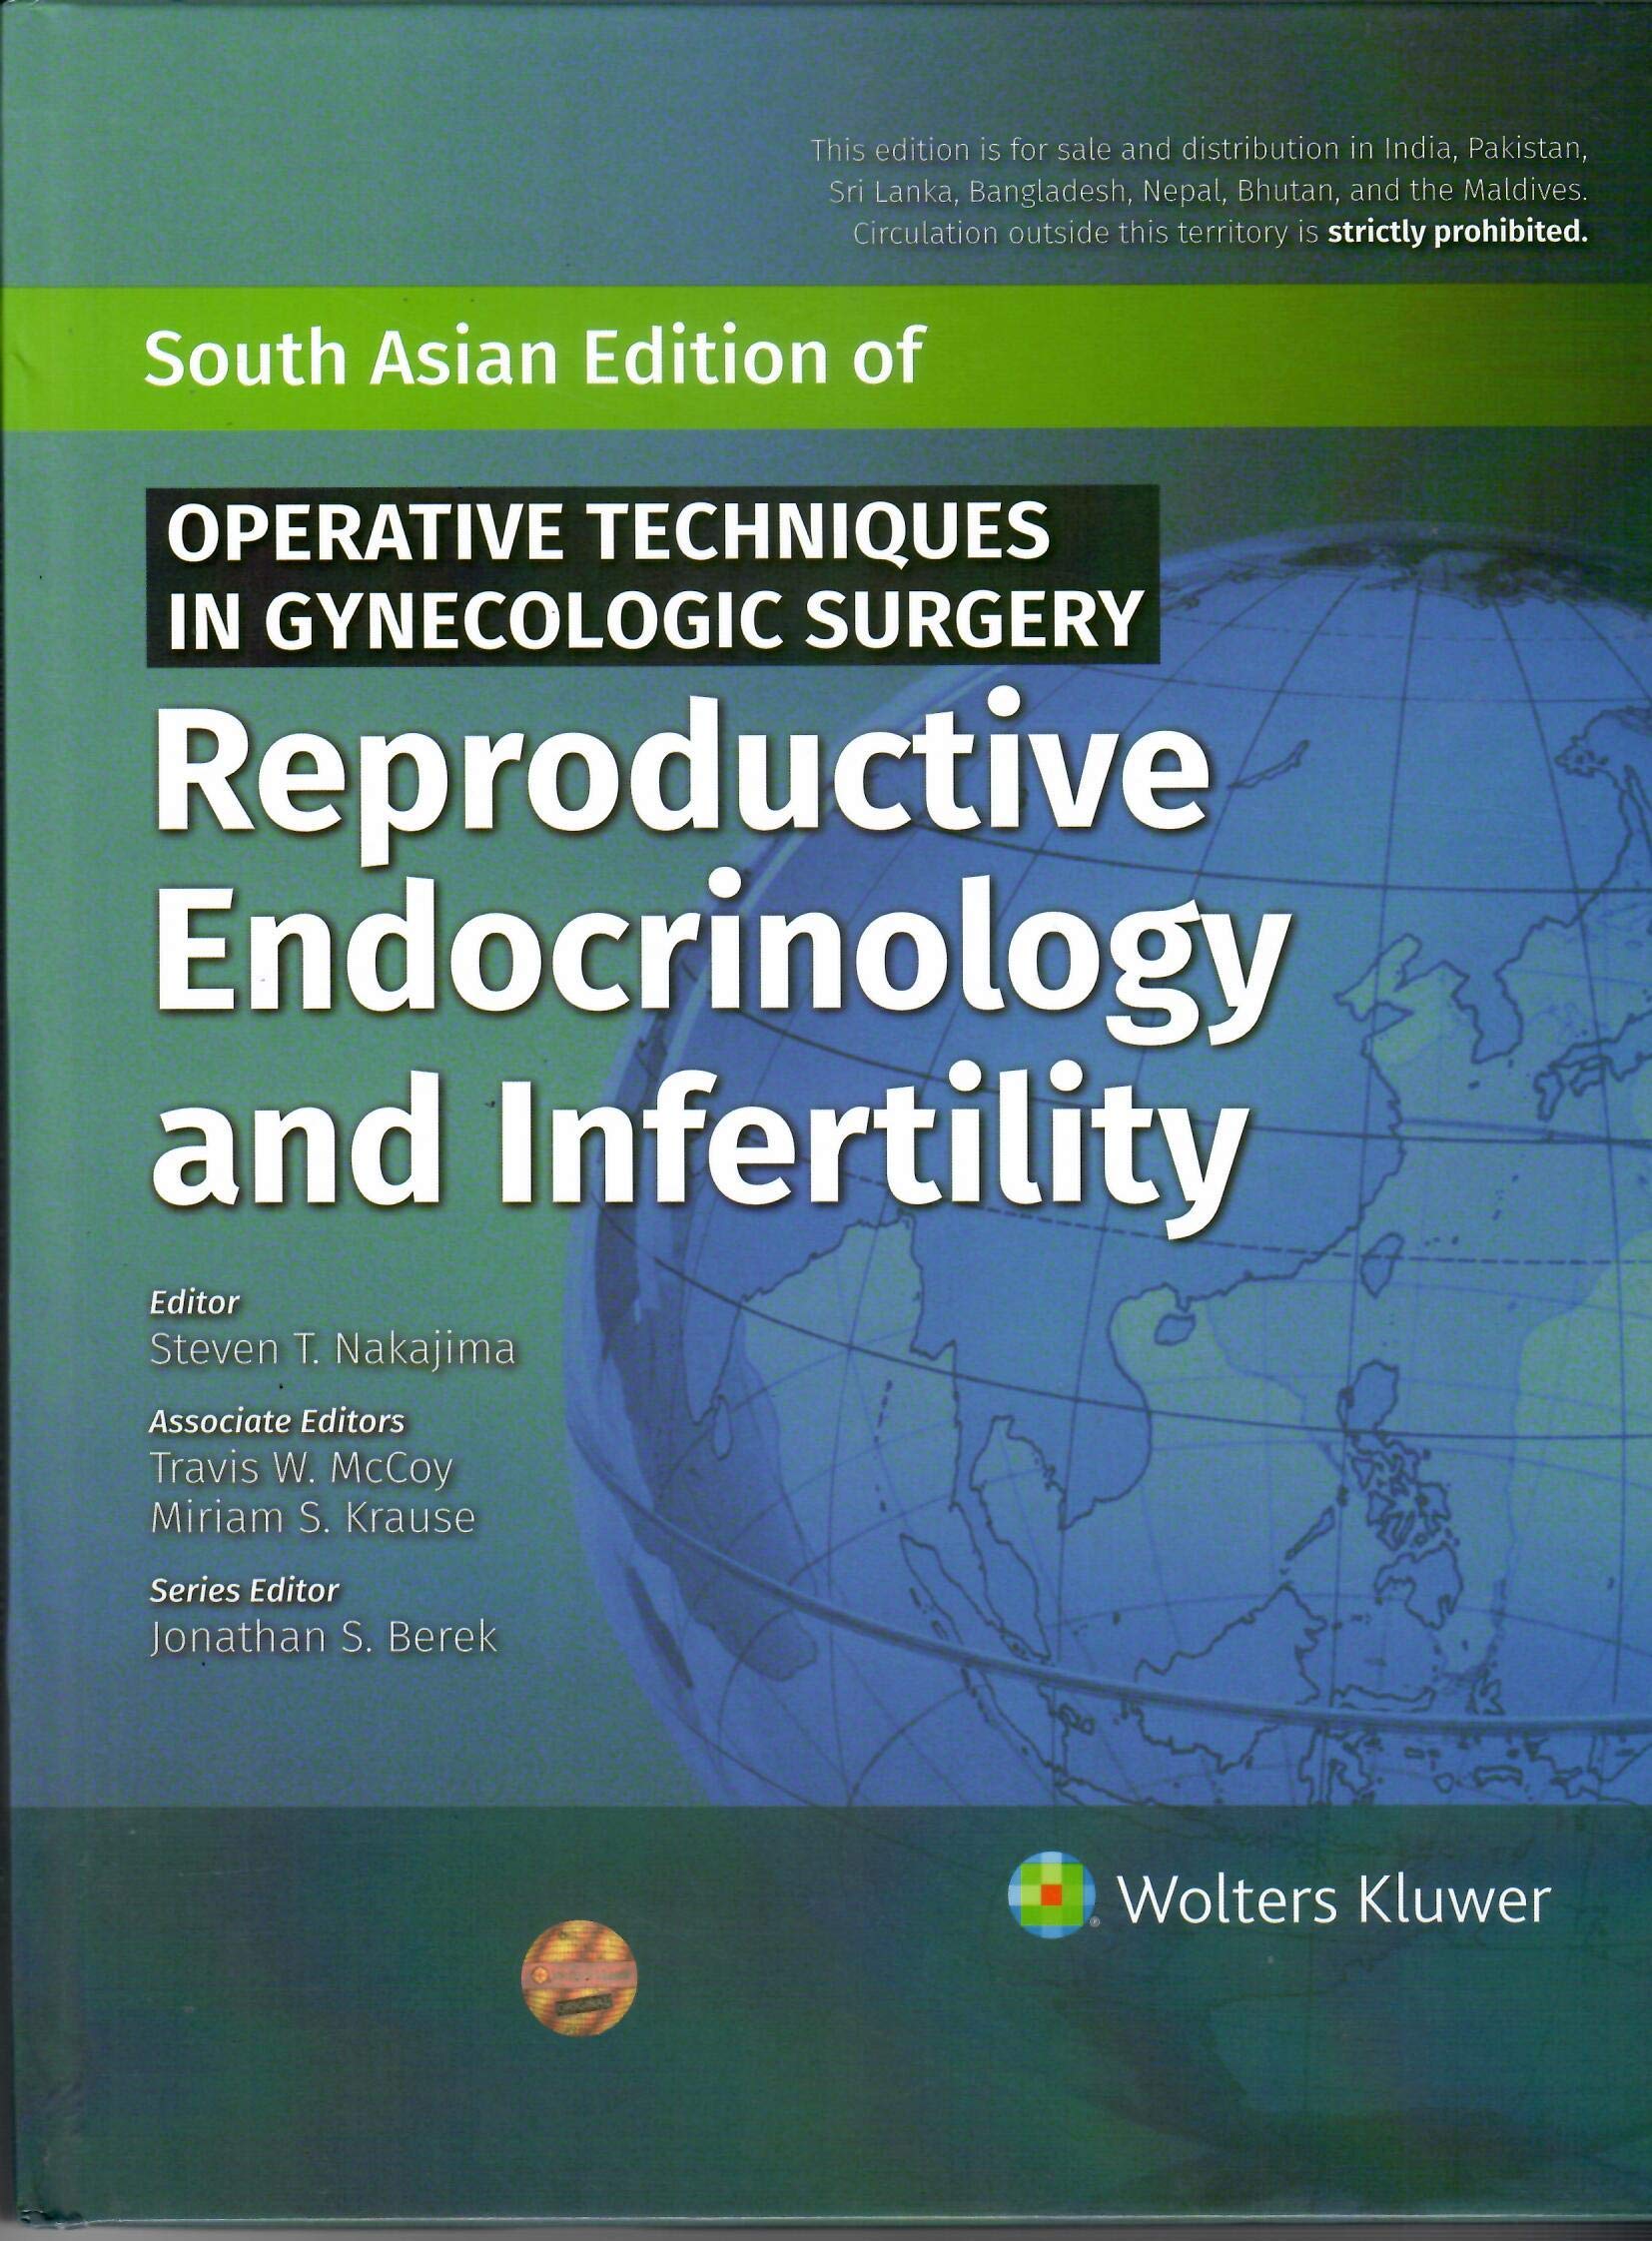 Operative Techniques in Gynecologic Surgery: Reproductive Endocrinology and Inferility (REI)- AIBH Exclusive